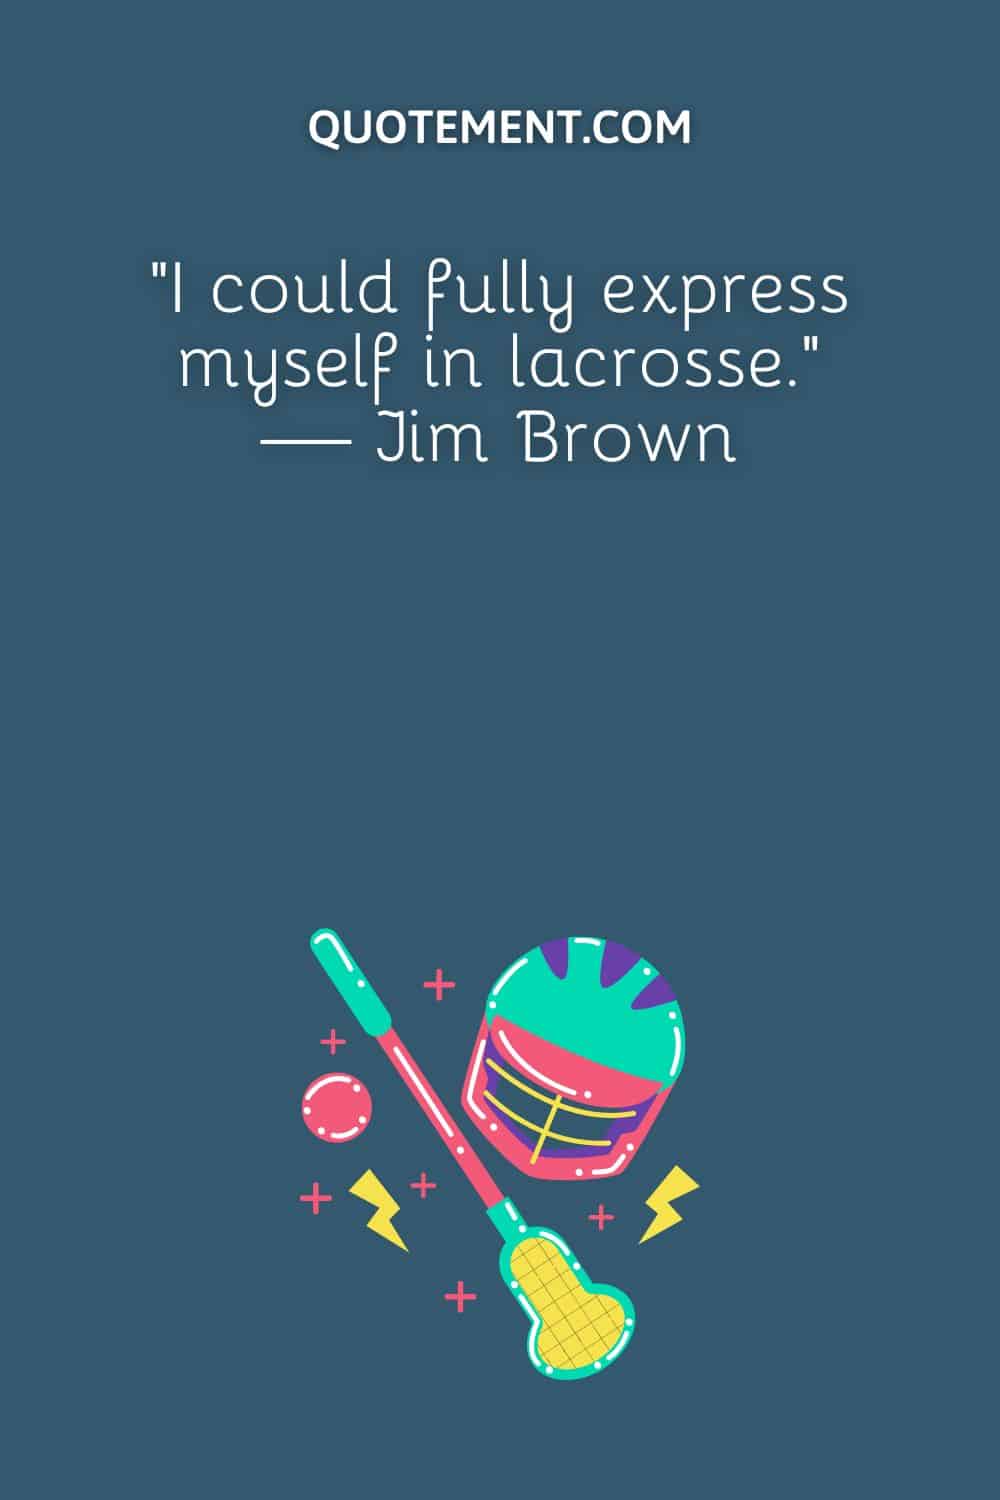 “I could fully express myself in lacrosse.” — Jim Brown